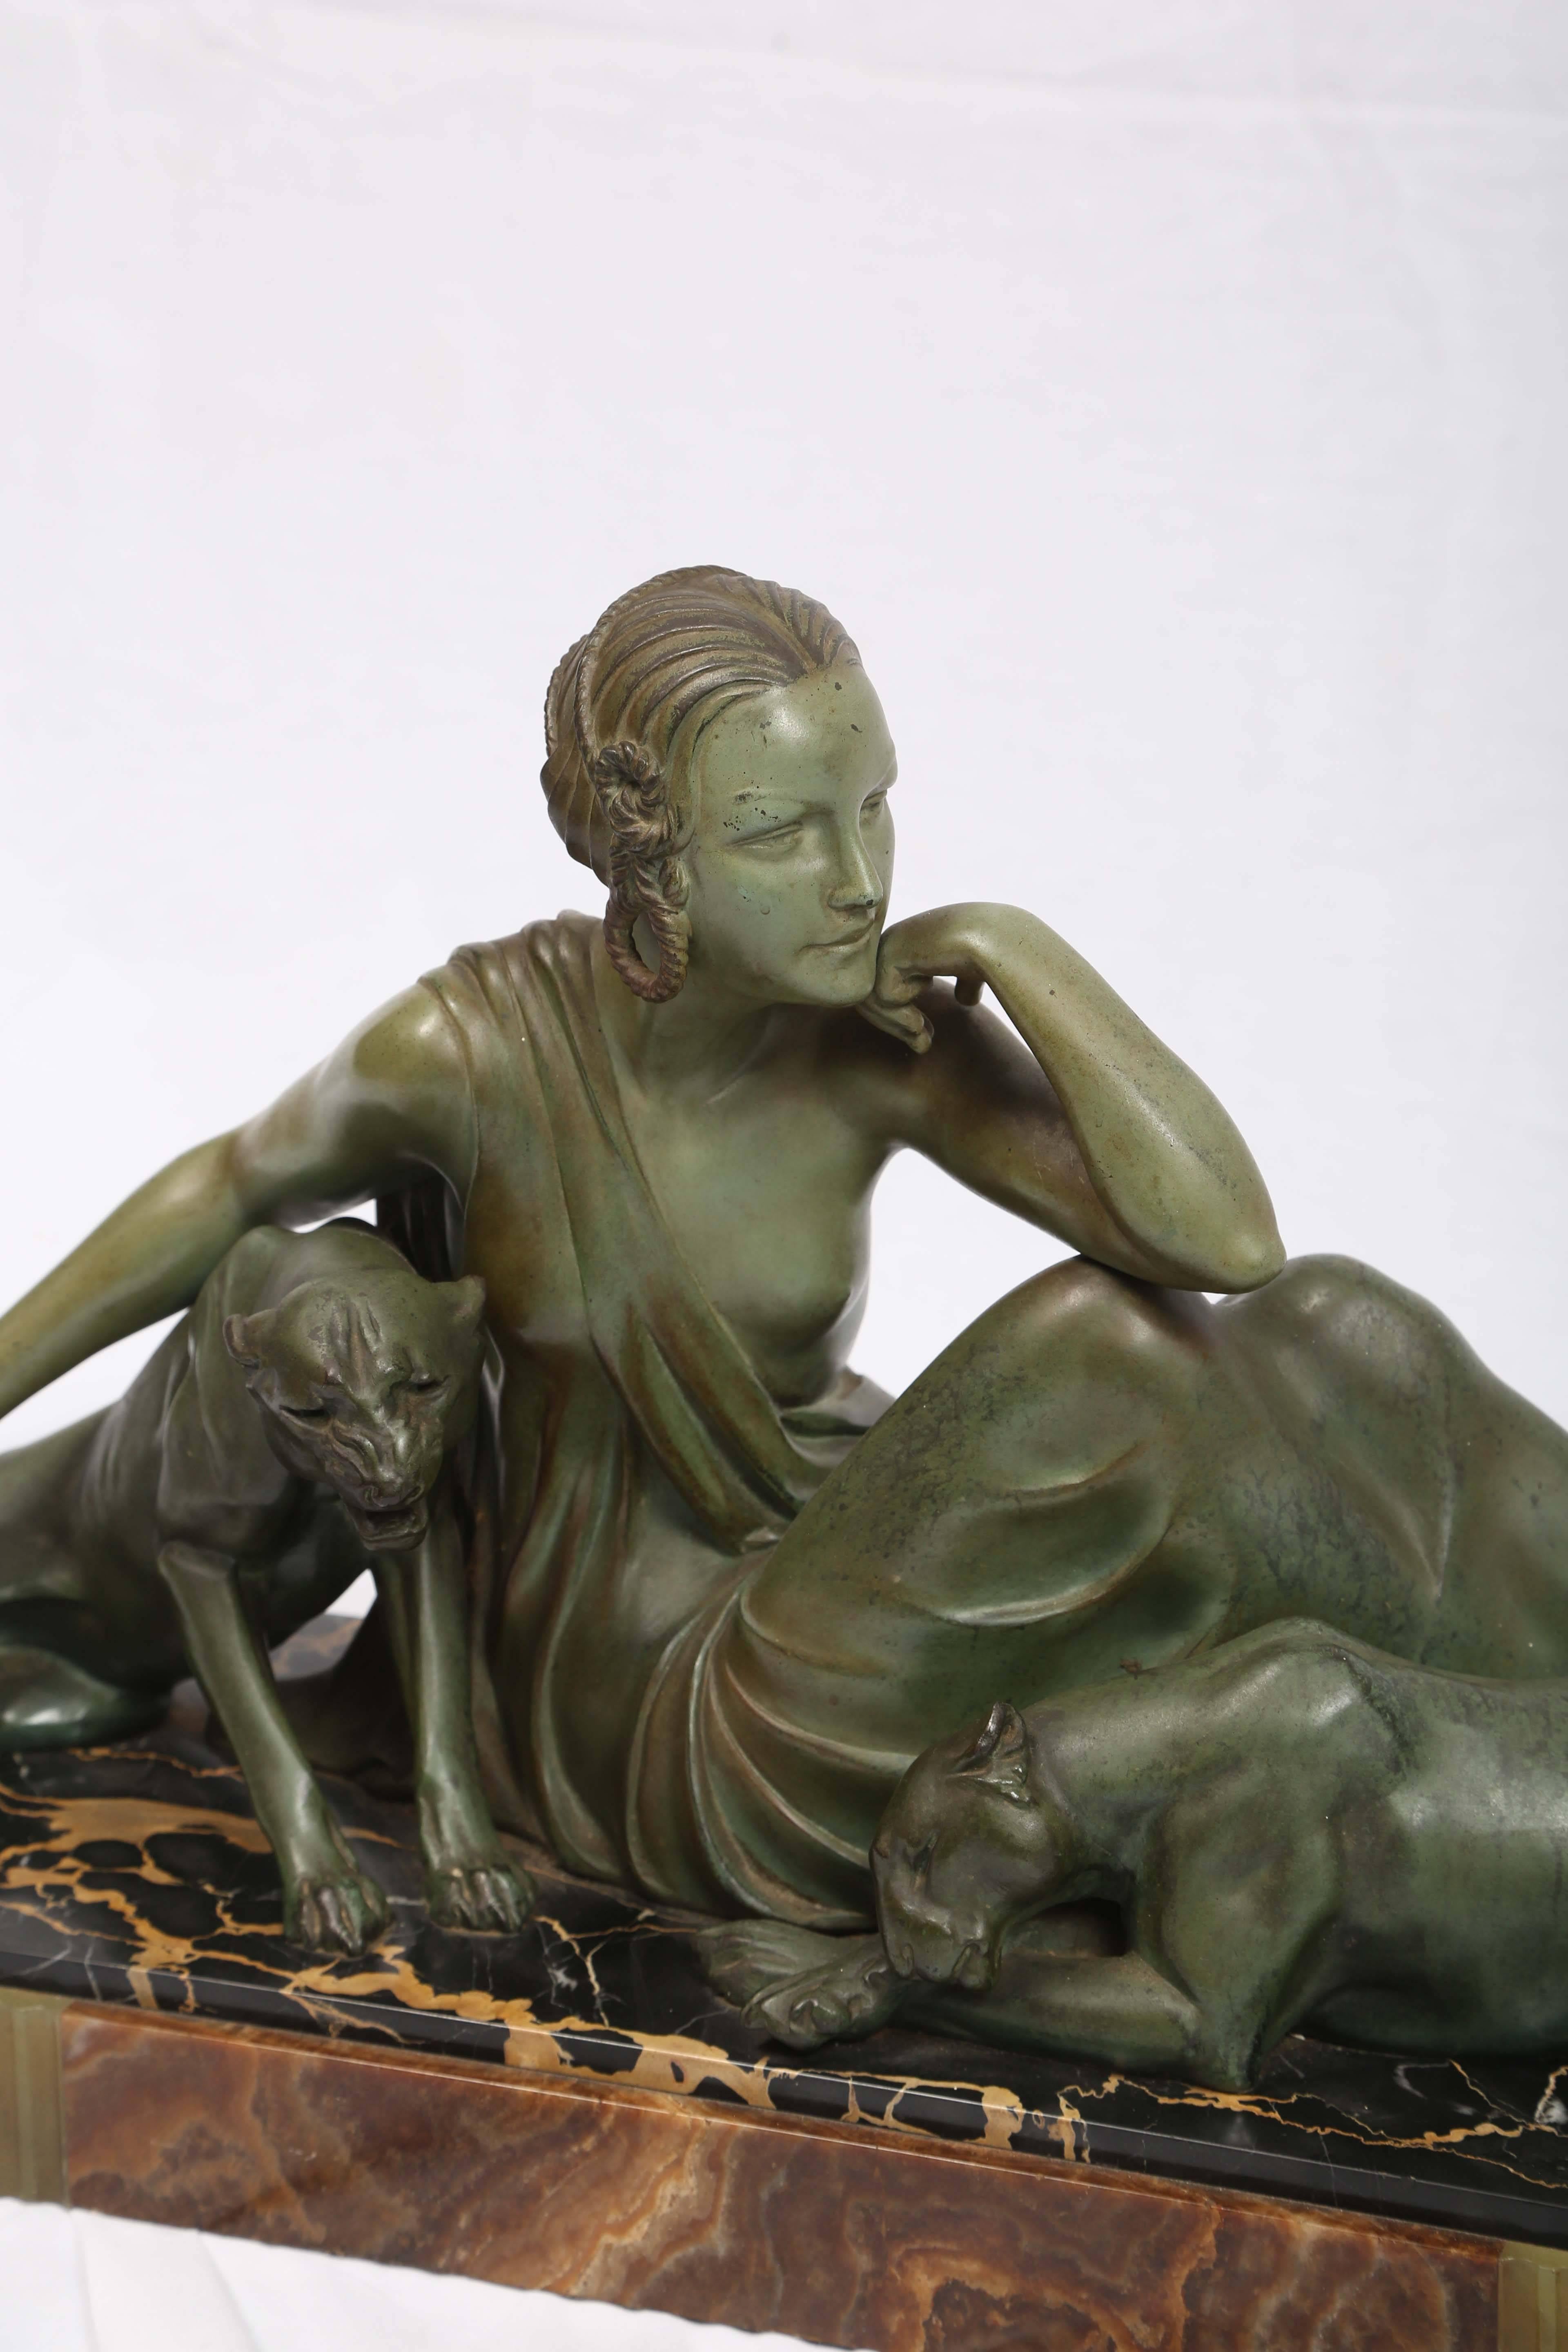 A superbly cast and polychromed female figure posed with two panthers.
Signed Godard on its marble base.